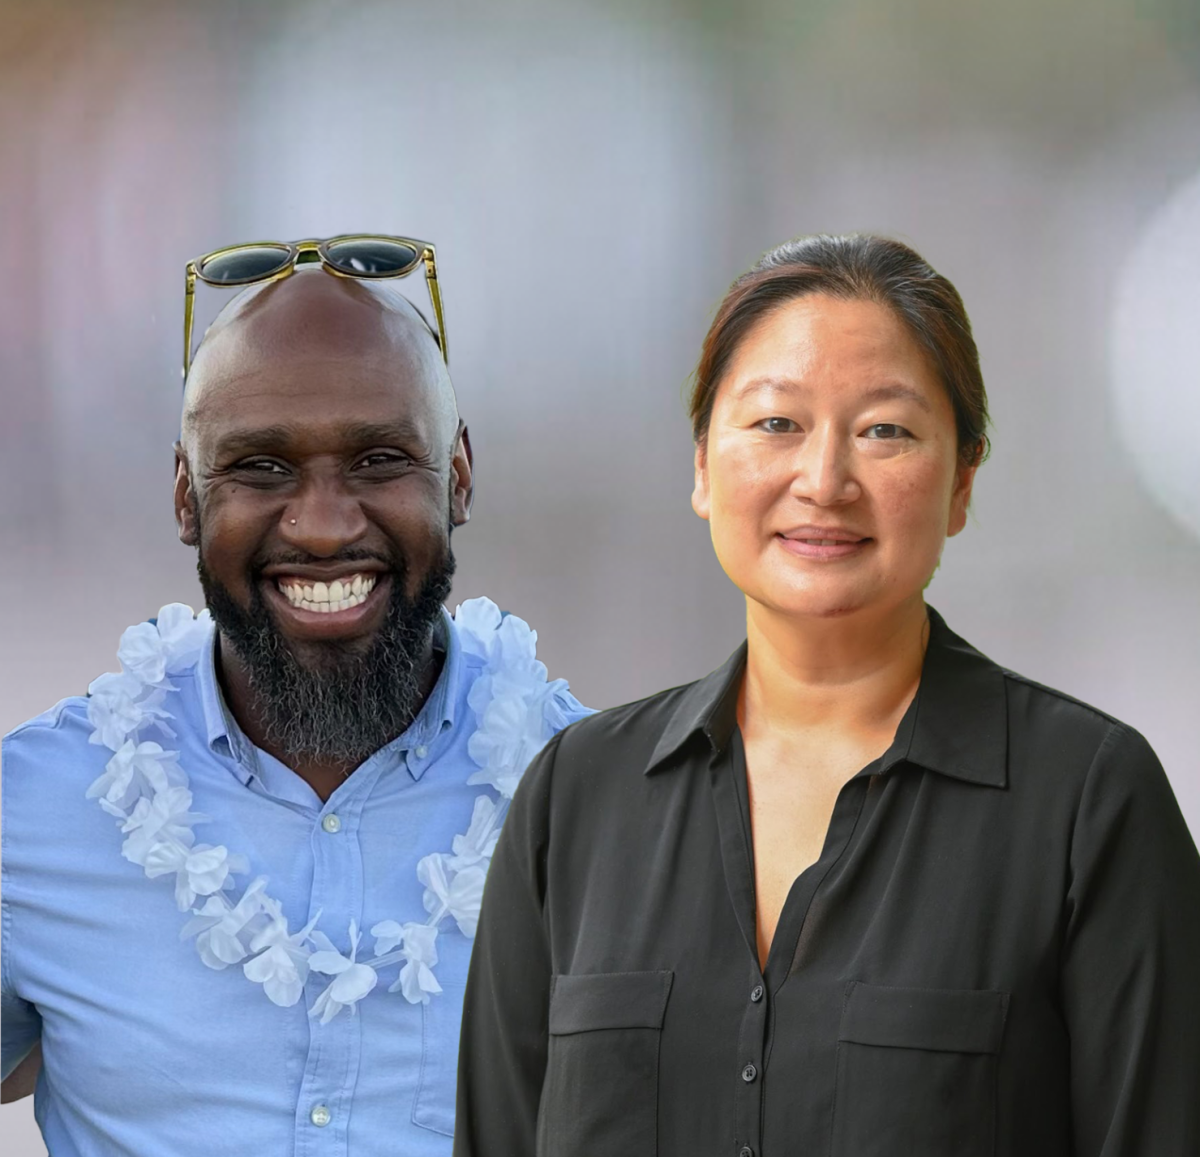 The school hired Jee Won Lee and Michael Durant to serve as deans starting in the 2024-2025 school year. Printed with permission of Lee and Durant.